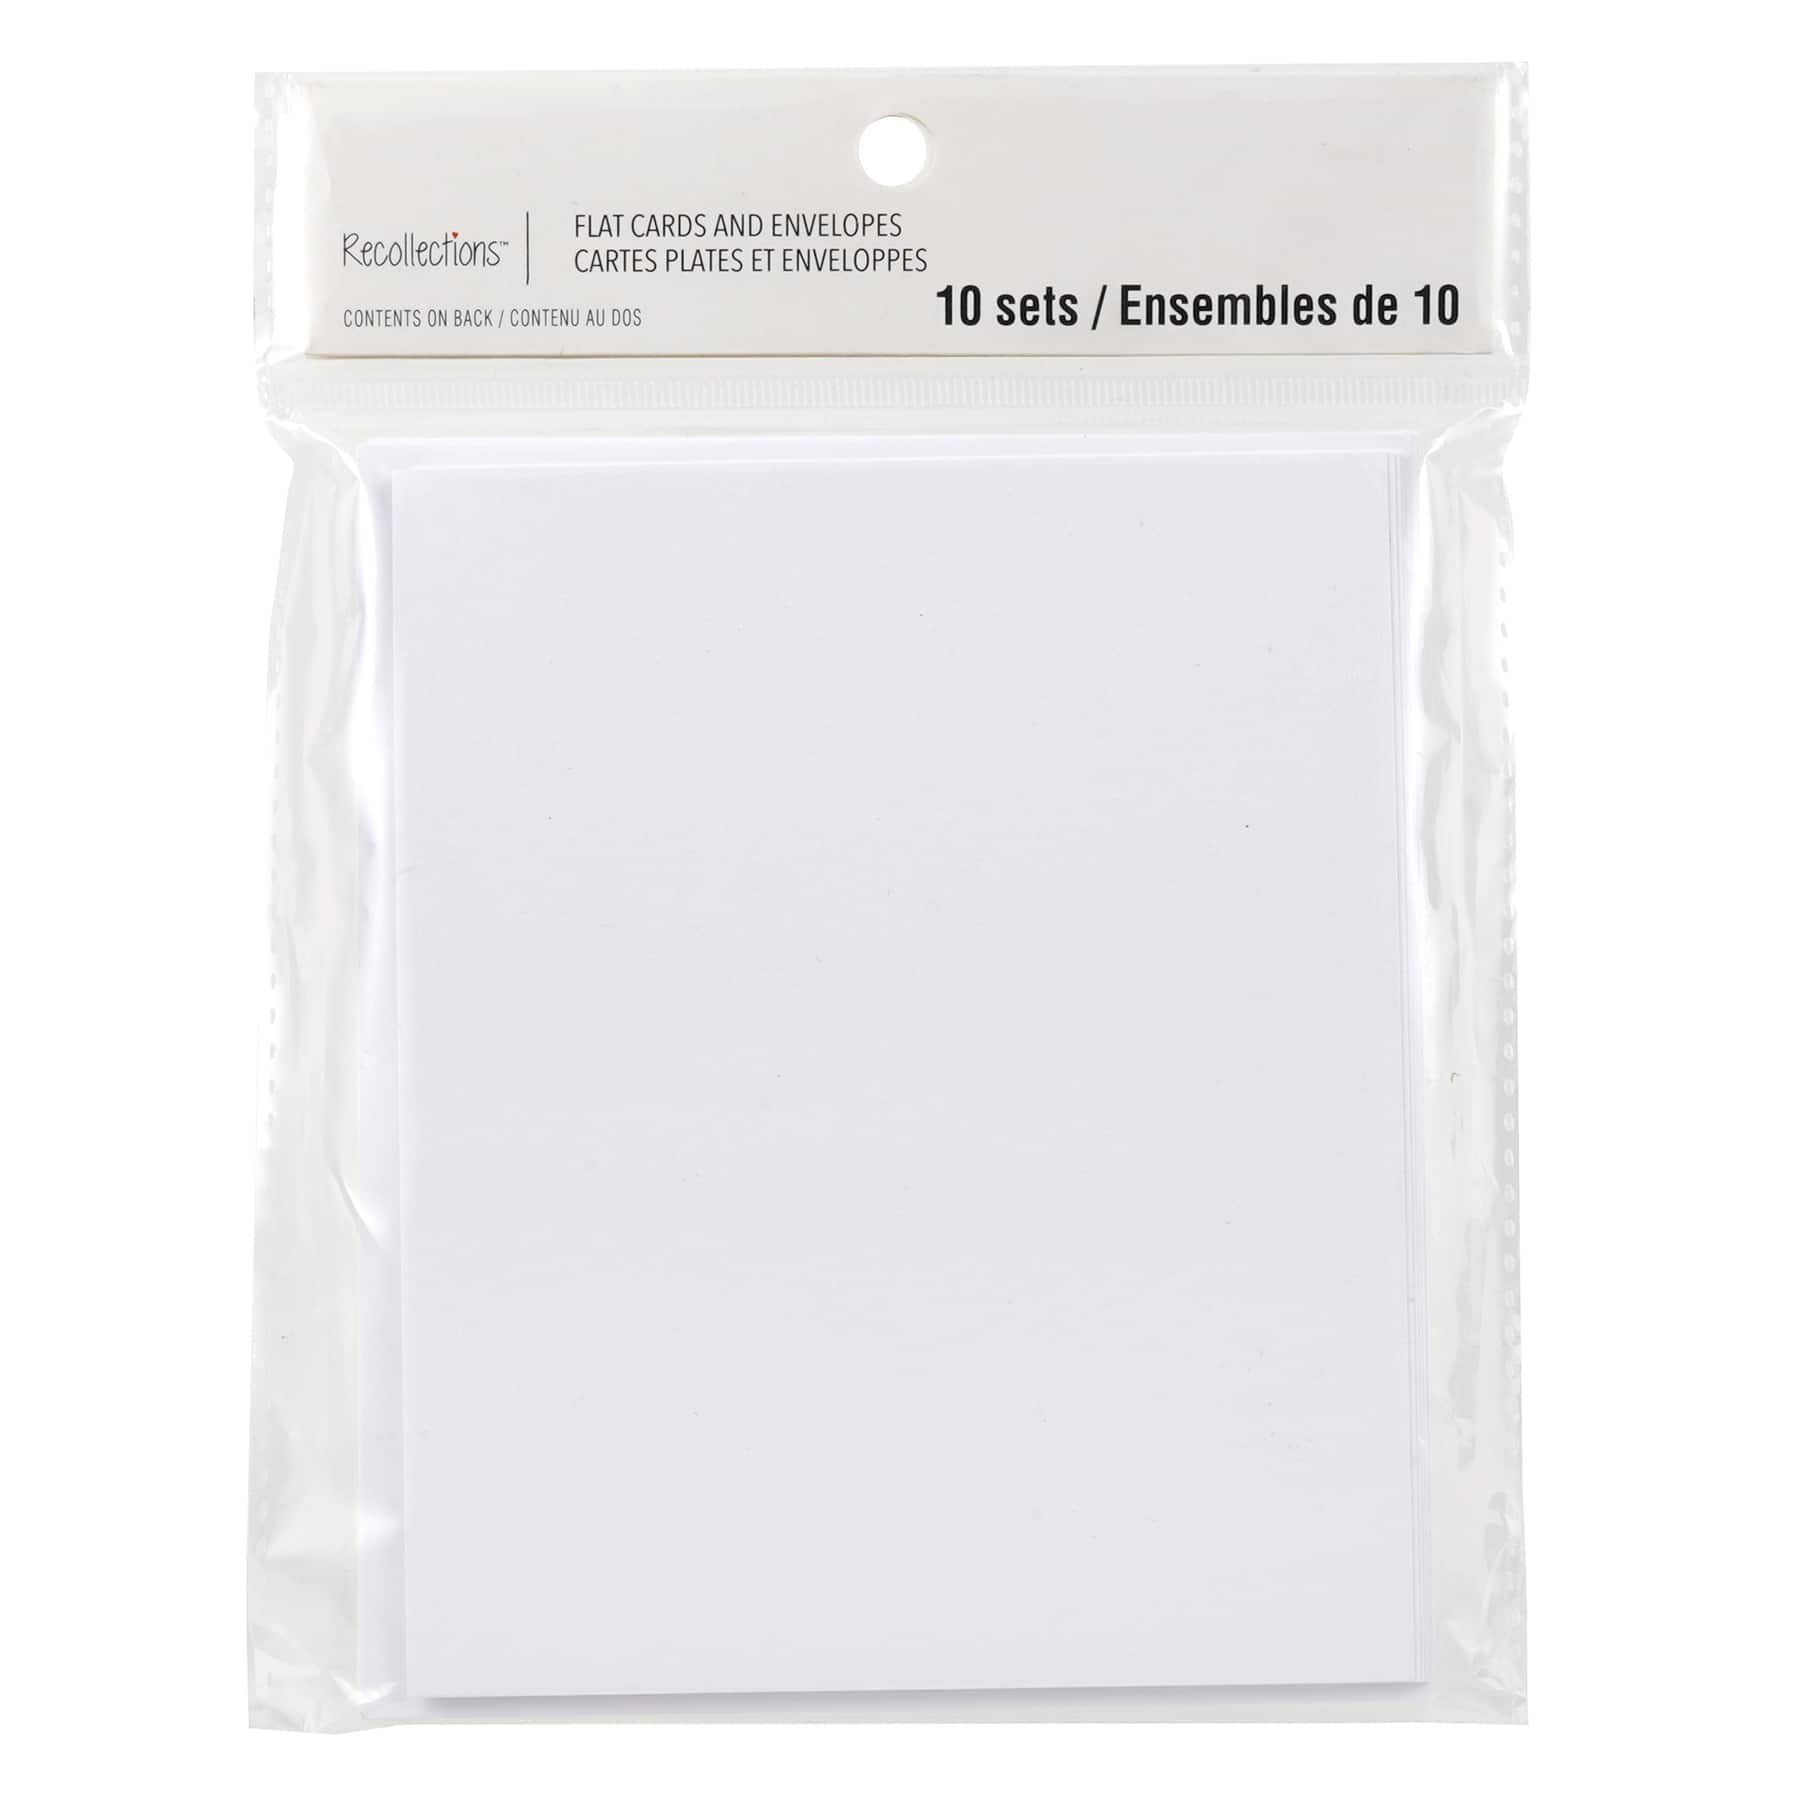 CHANGE OF ADDRESS NOTE CARDS New in sealed plastic 10 cards & envelopes 